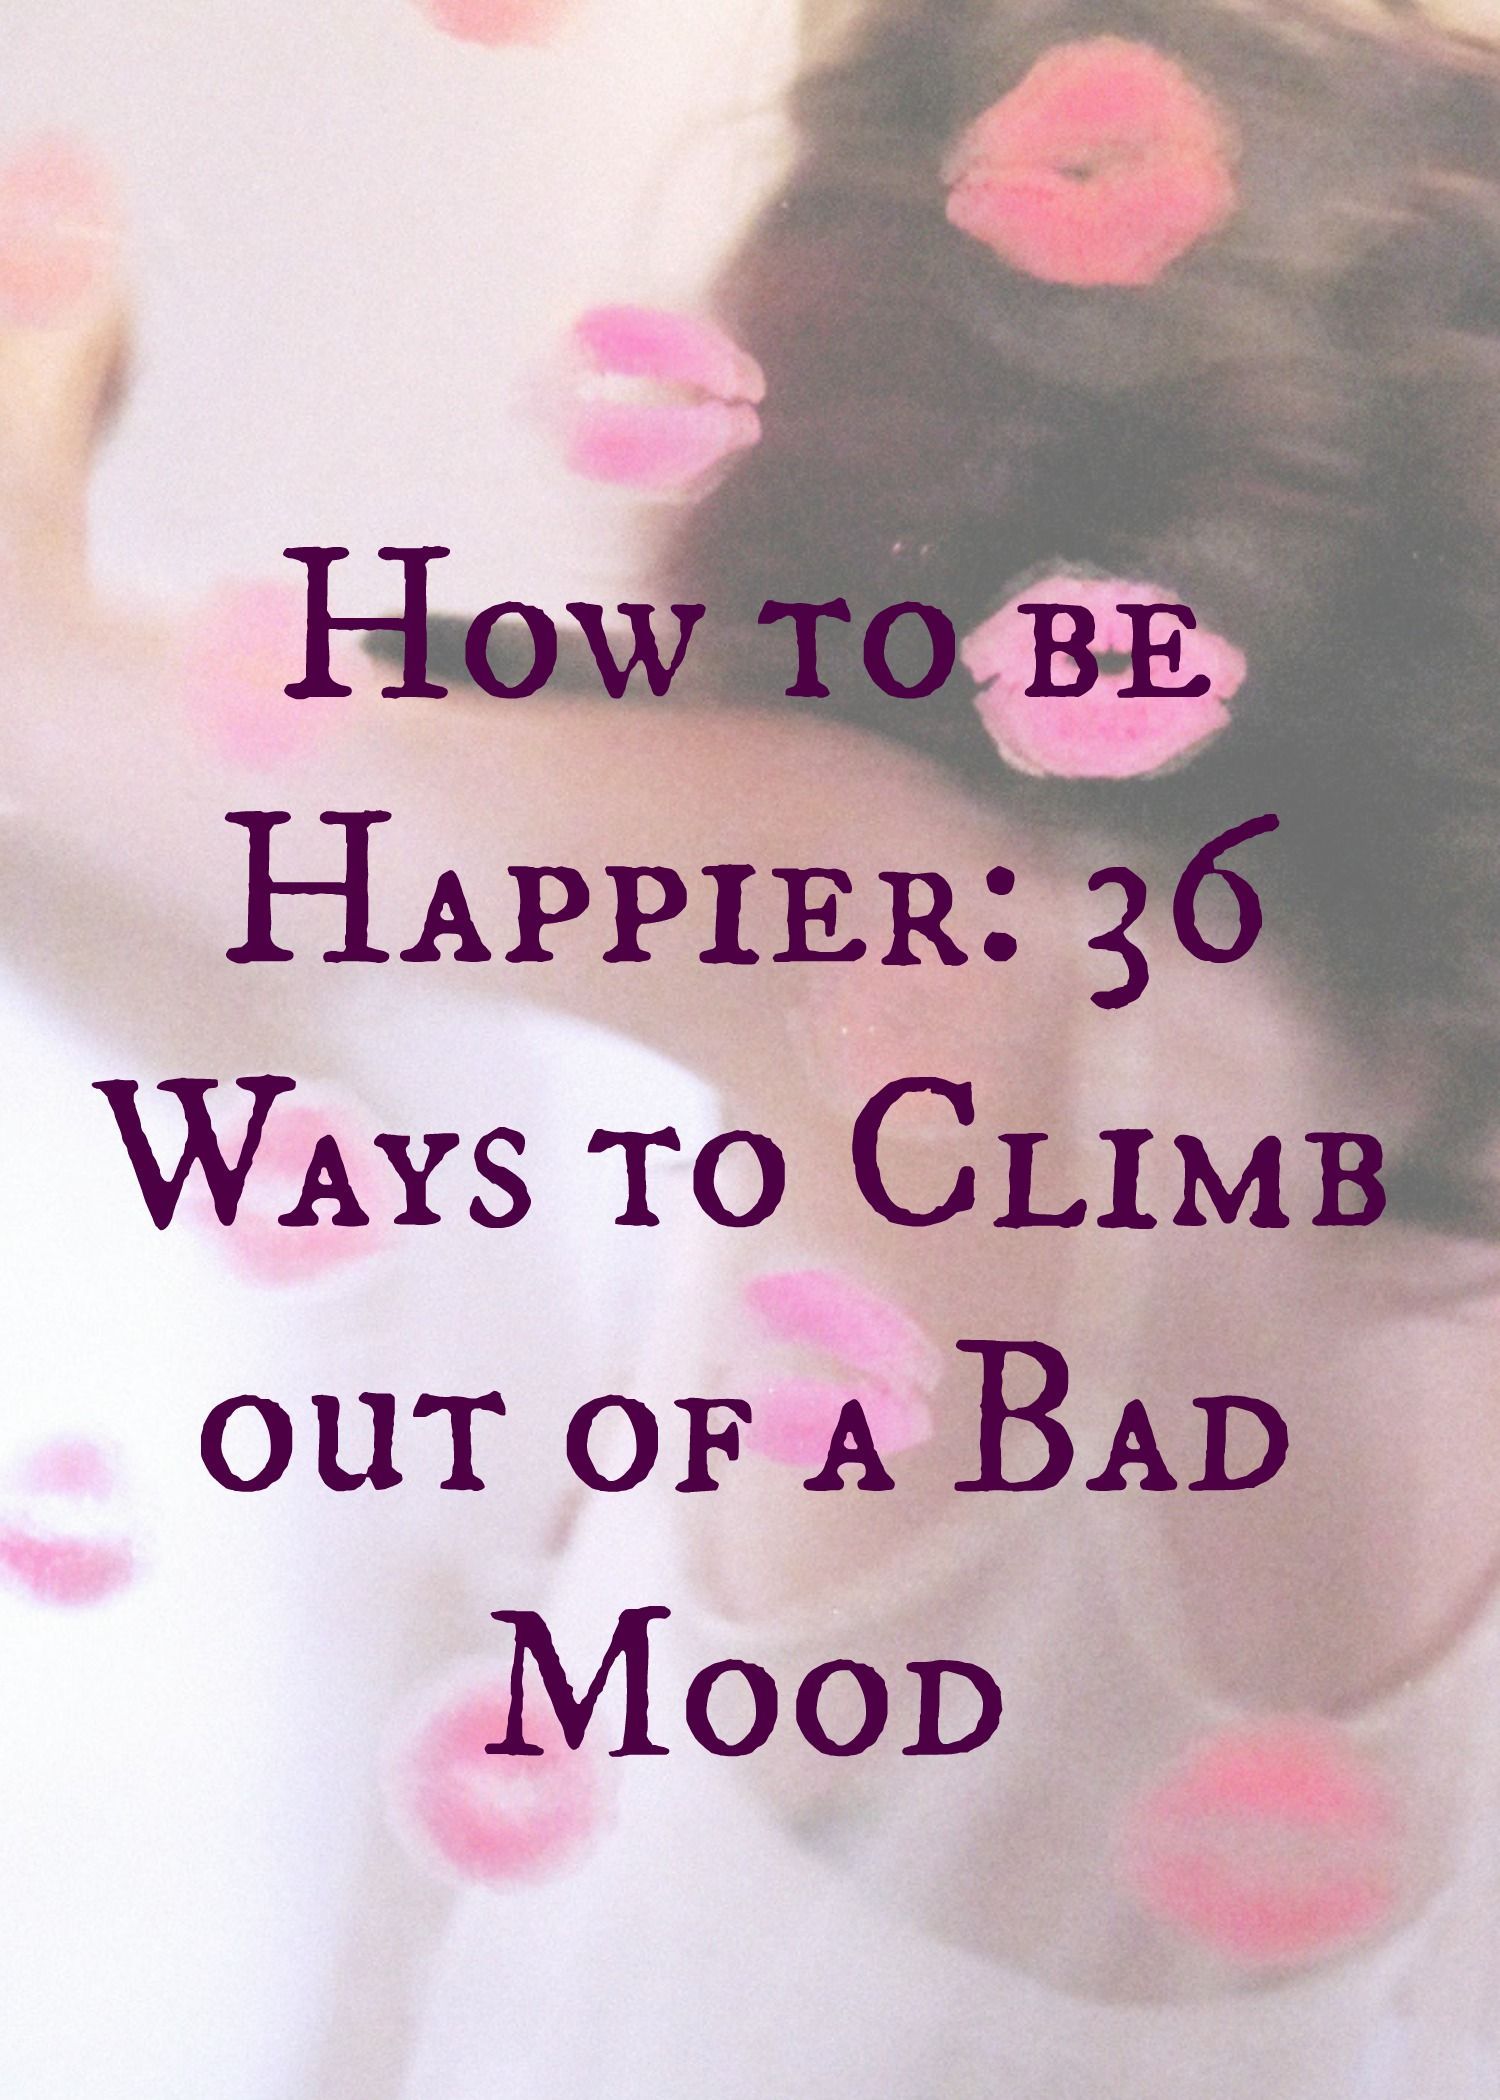 How to be Happier: 36 Ways to Climb out of a Bad Mood — #happy #positive